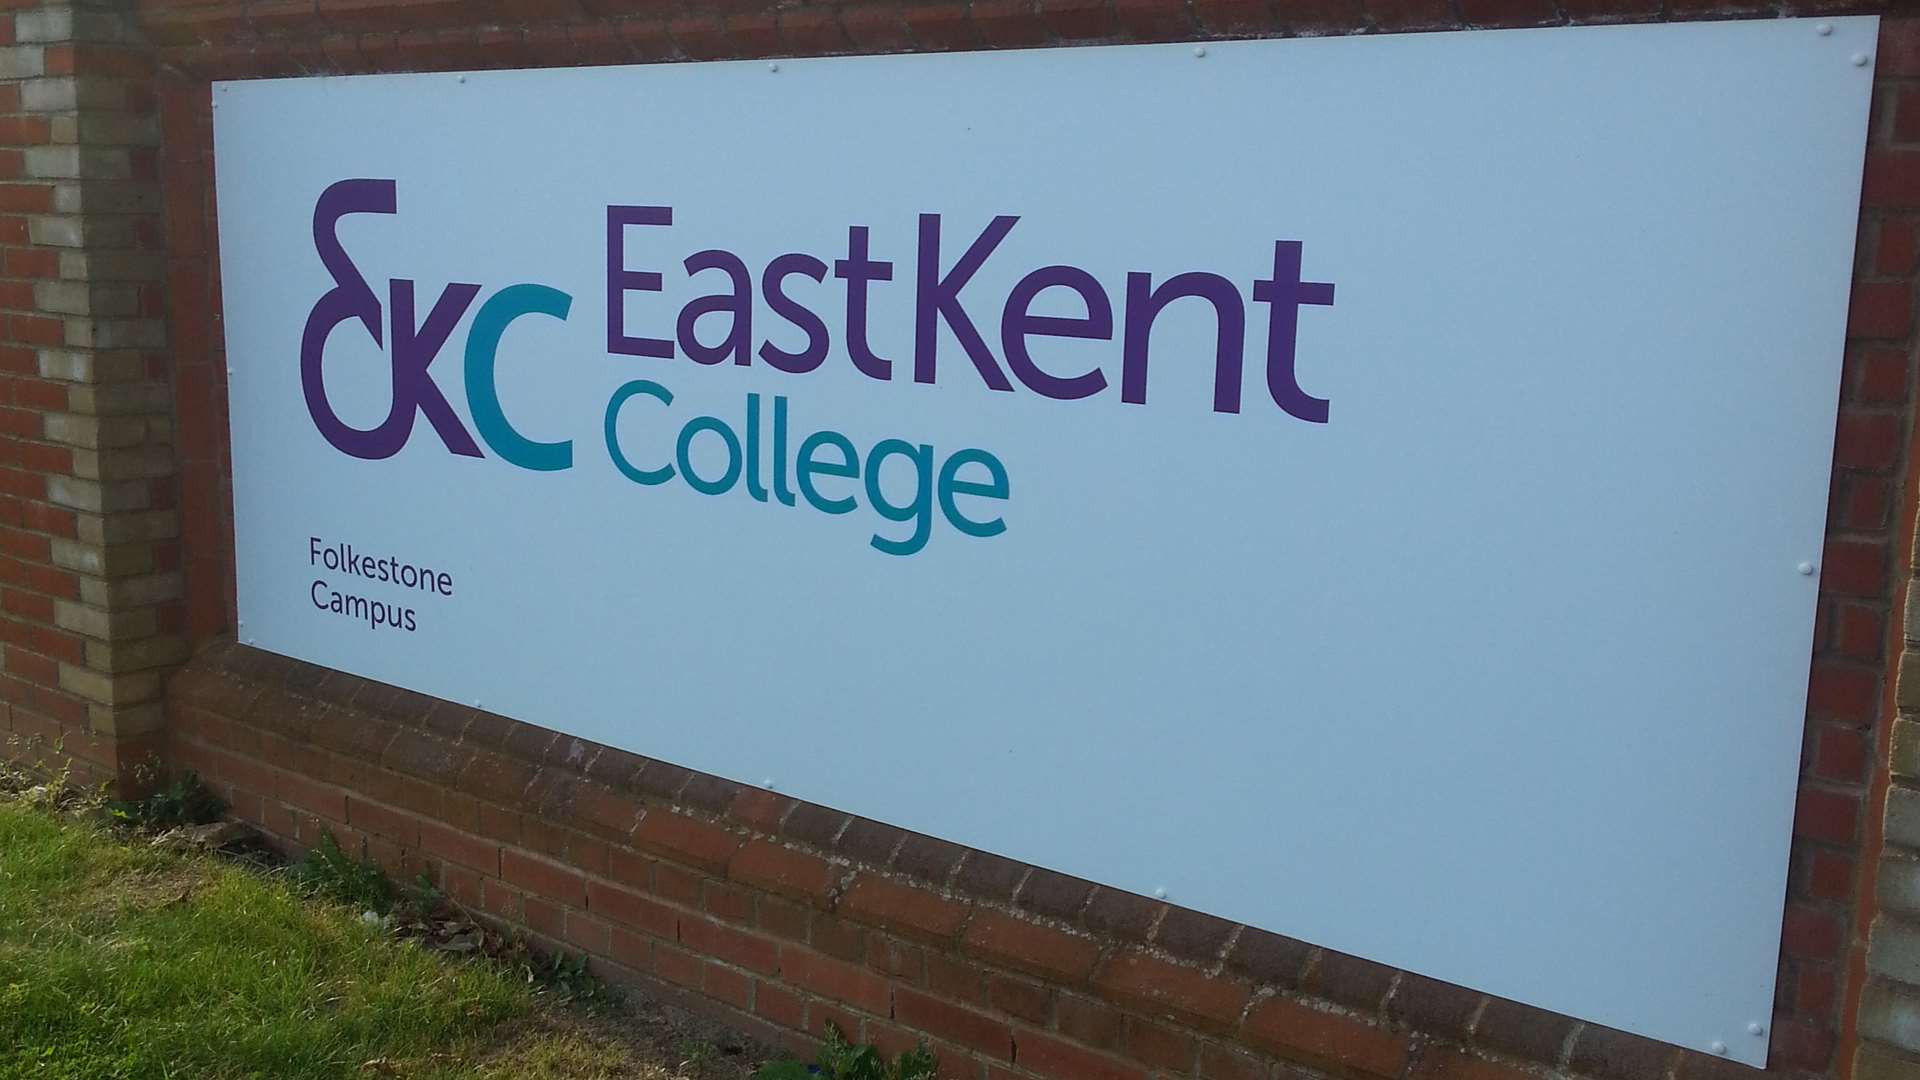 The newly branded Folkestone campus of East Kent College